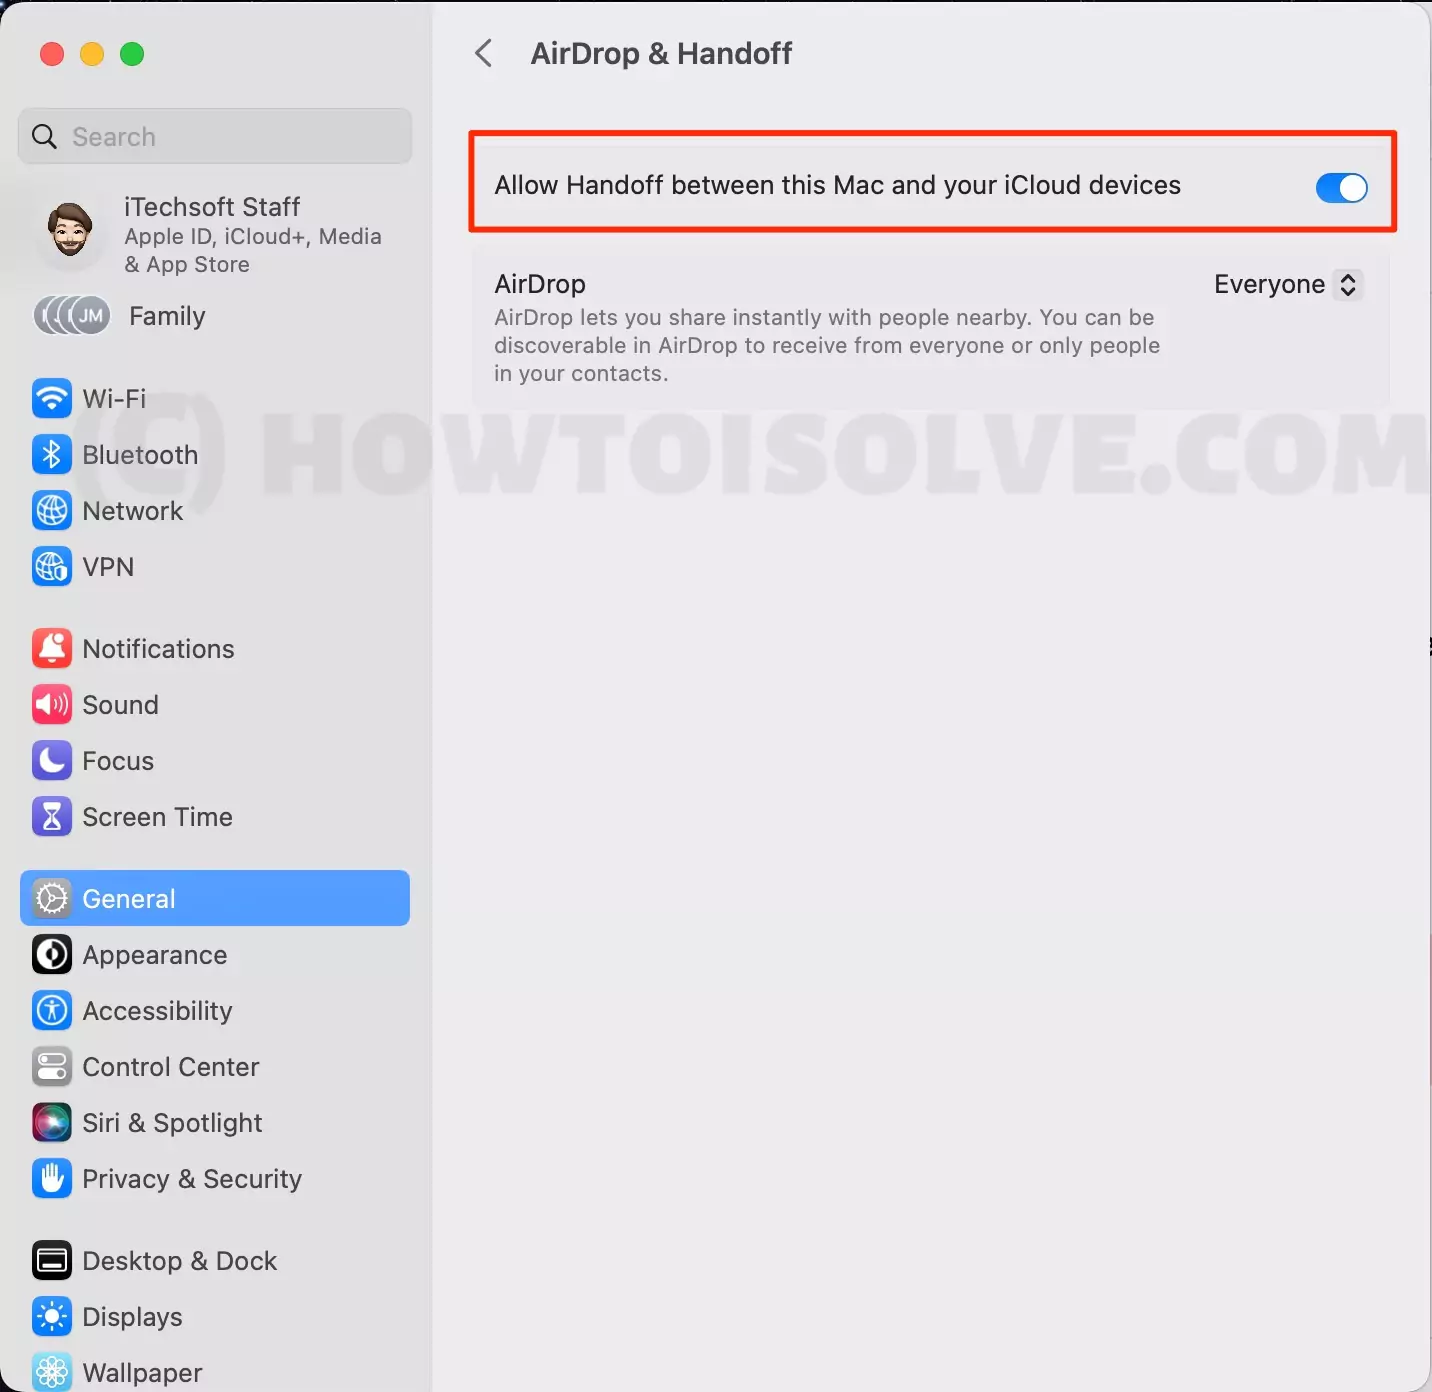 allow-handoff-between-this-mac-and-your-icloud-devices-on-mac